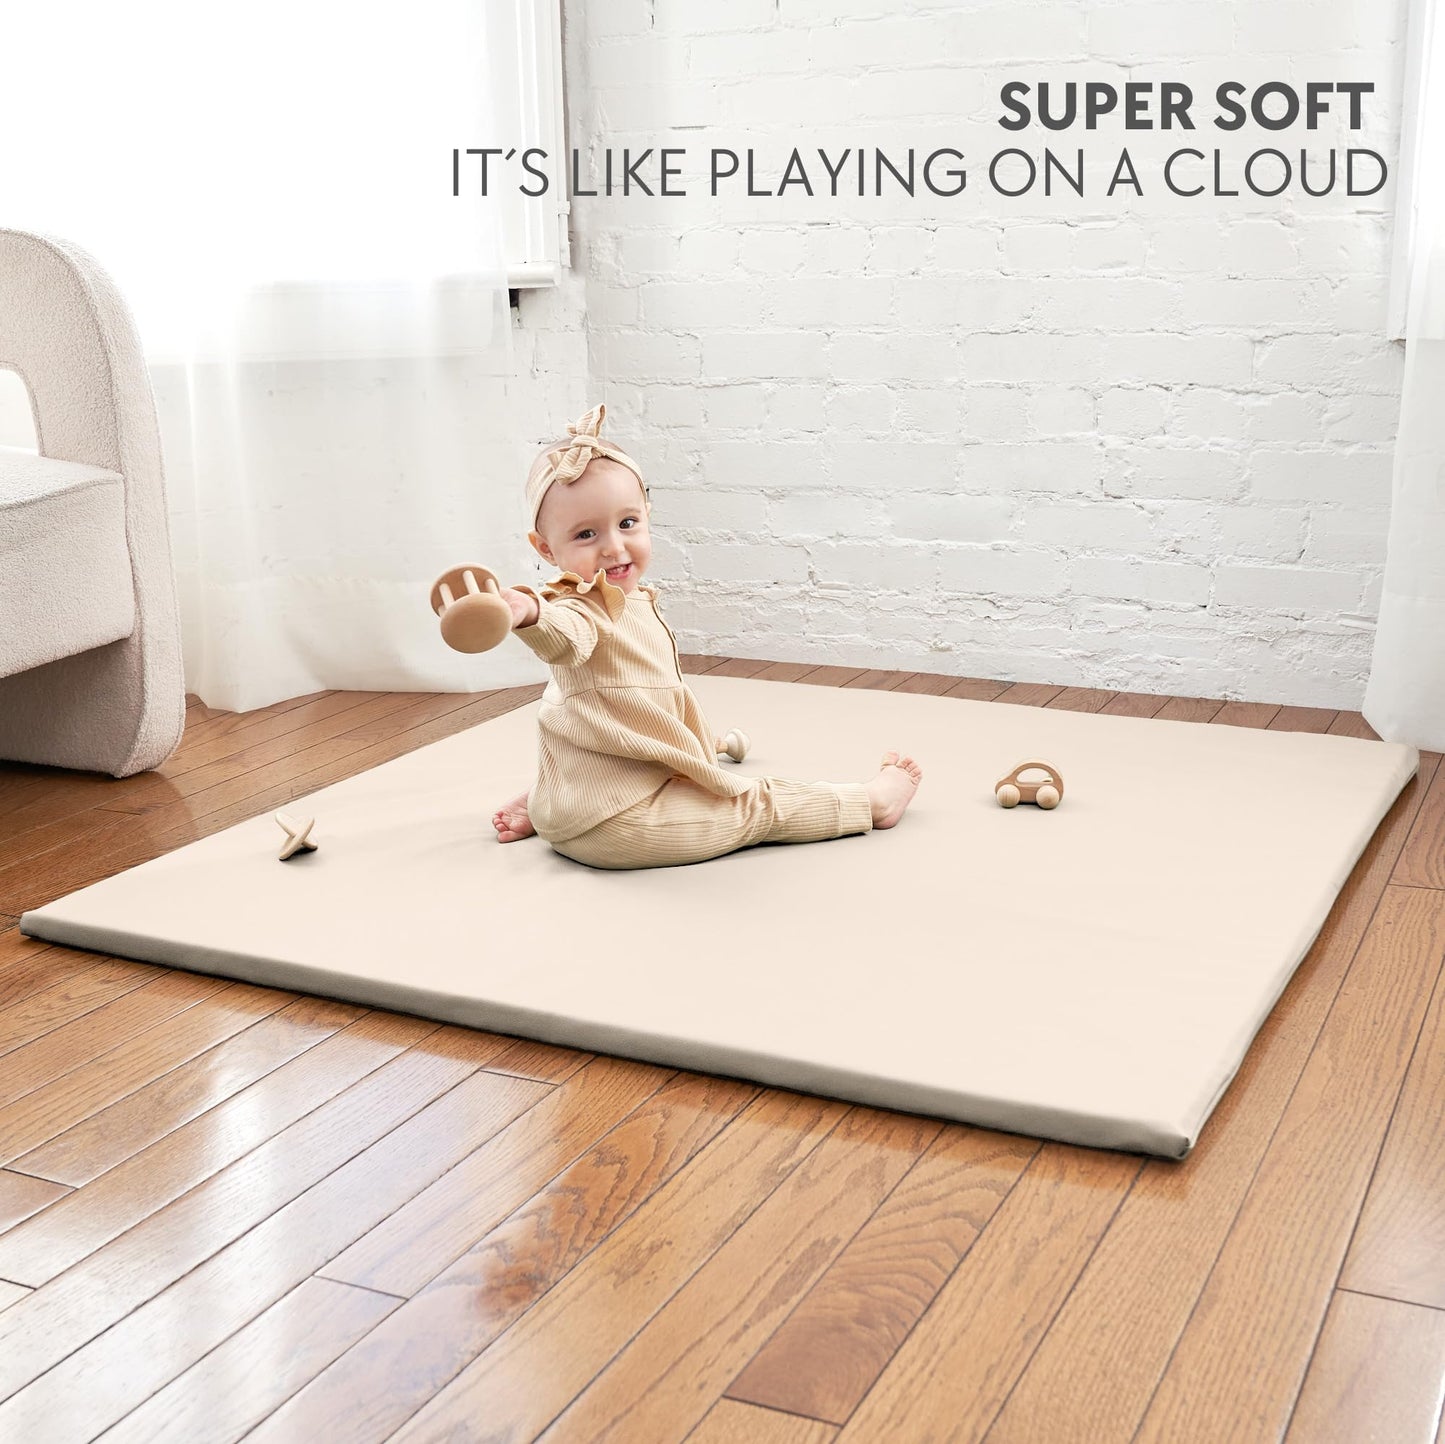 Stylish Vegan Leather Baby Play Mat - Soft, Easy to Clean Floor Mat Creates A Safe Play Area for Your Baby - The Perfect Modern Foam Playmat Fits Nicely with Your Kids Playroom Or Home Decor